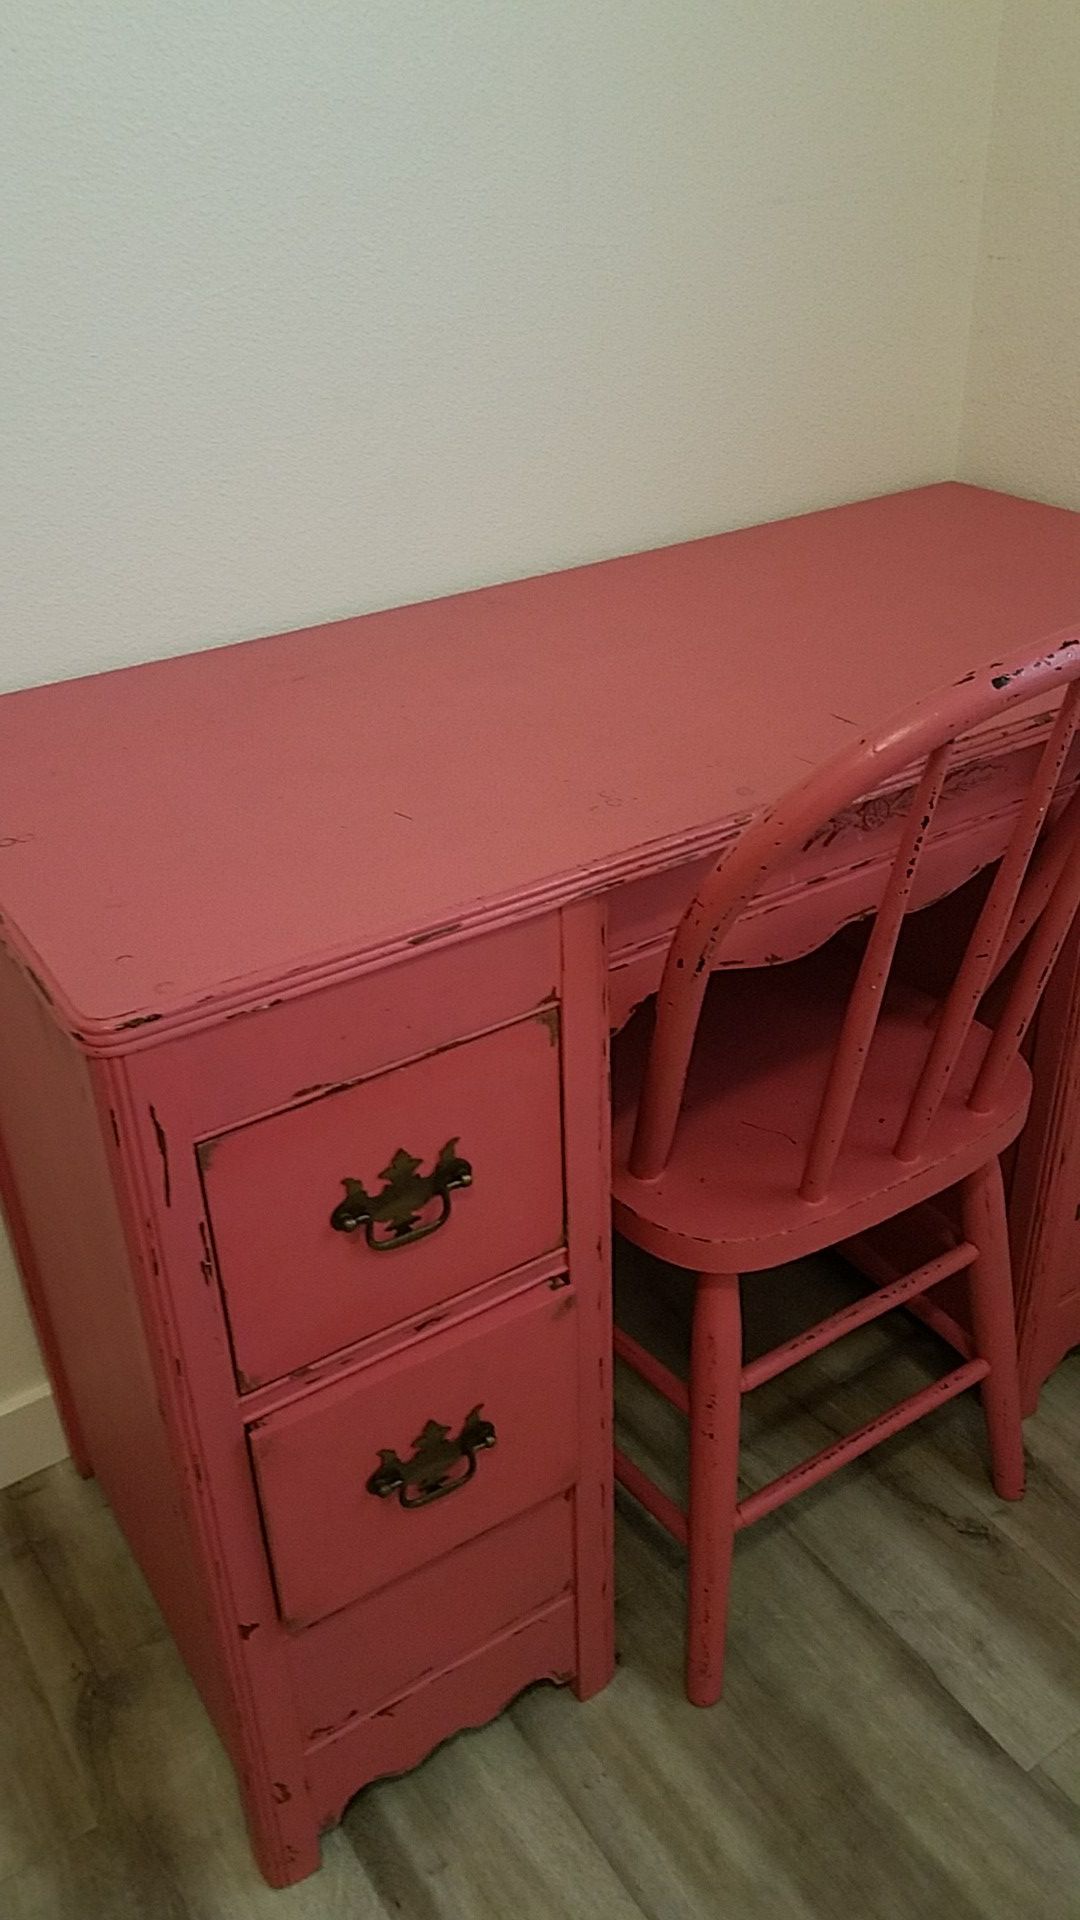 vintage style Pink Desk with chair